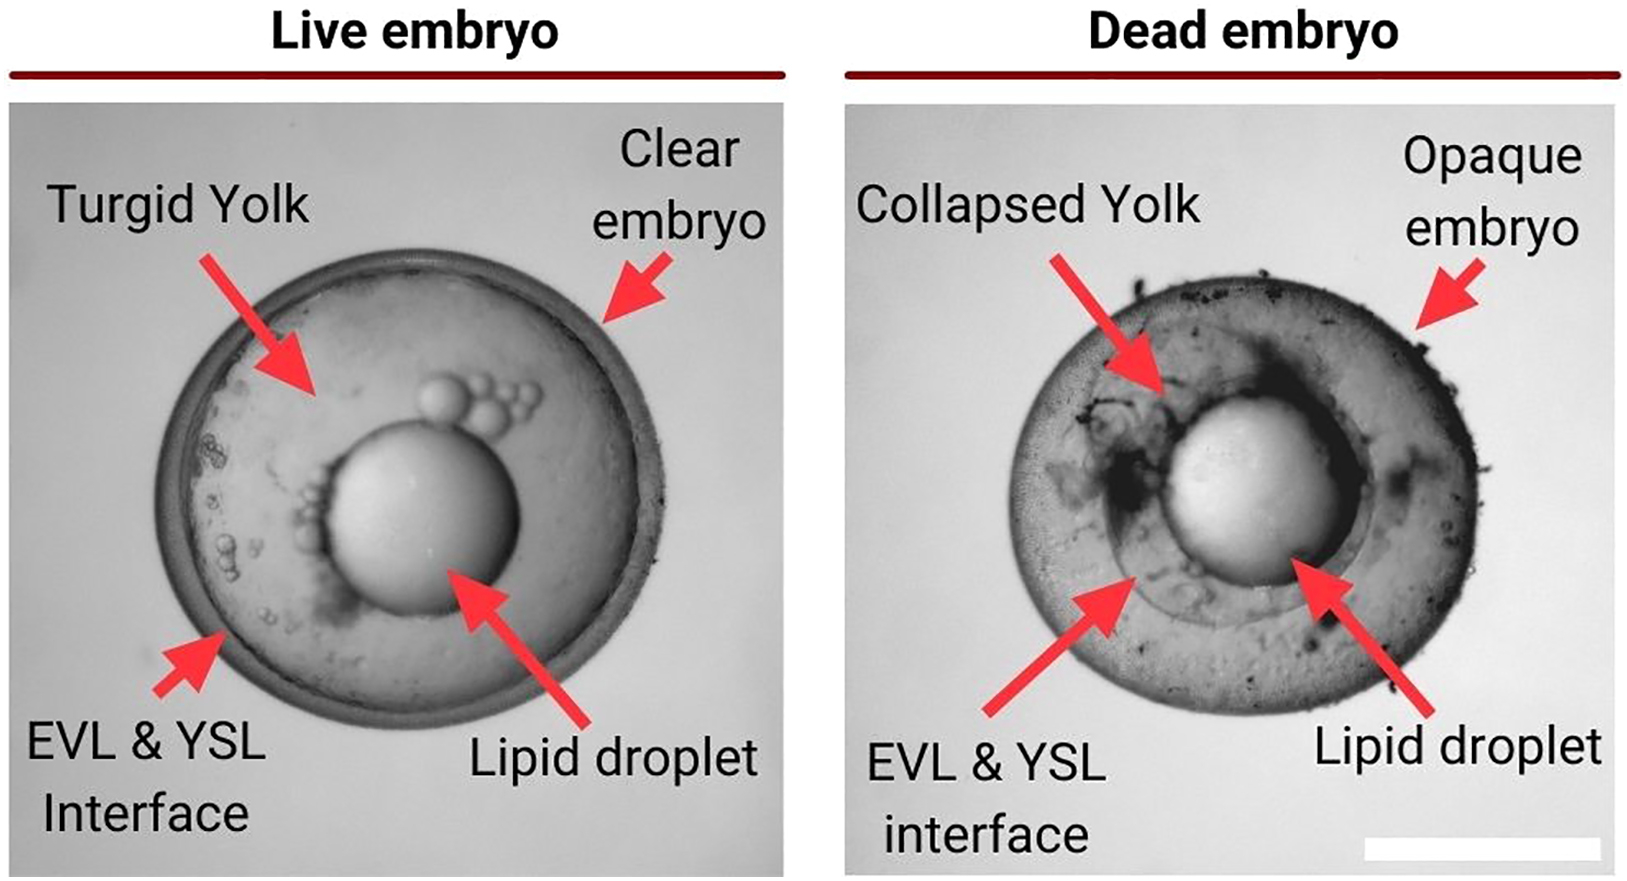 Soft Beads Embryos: Dead Egg with Red Dot